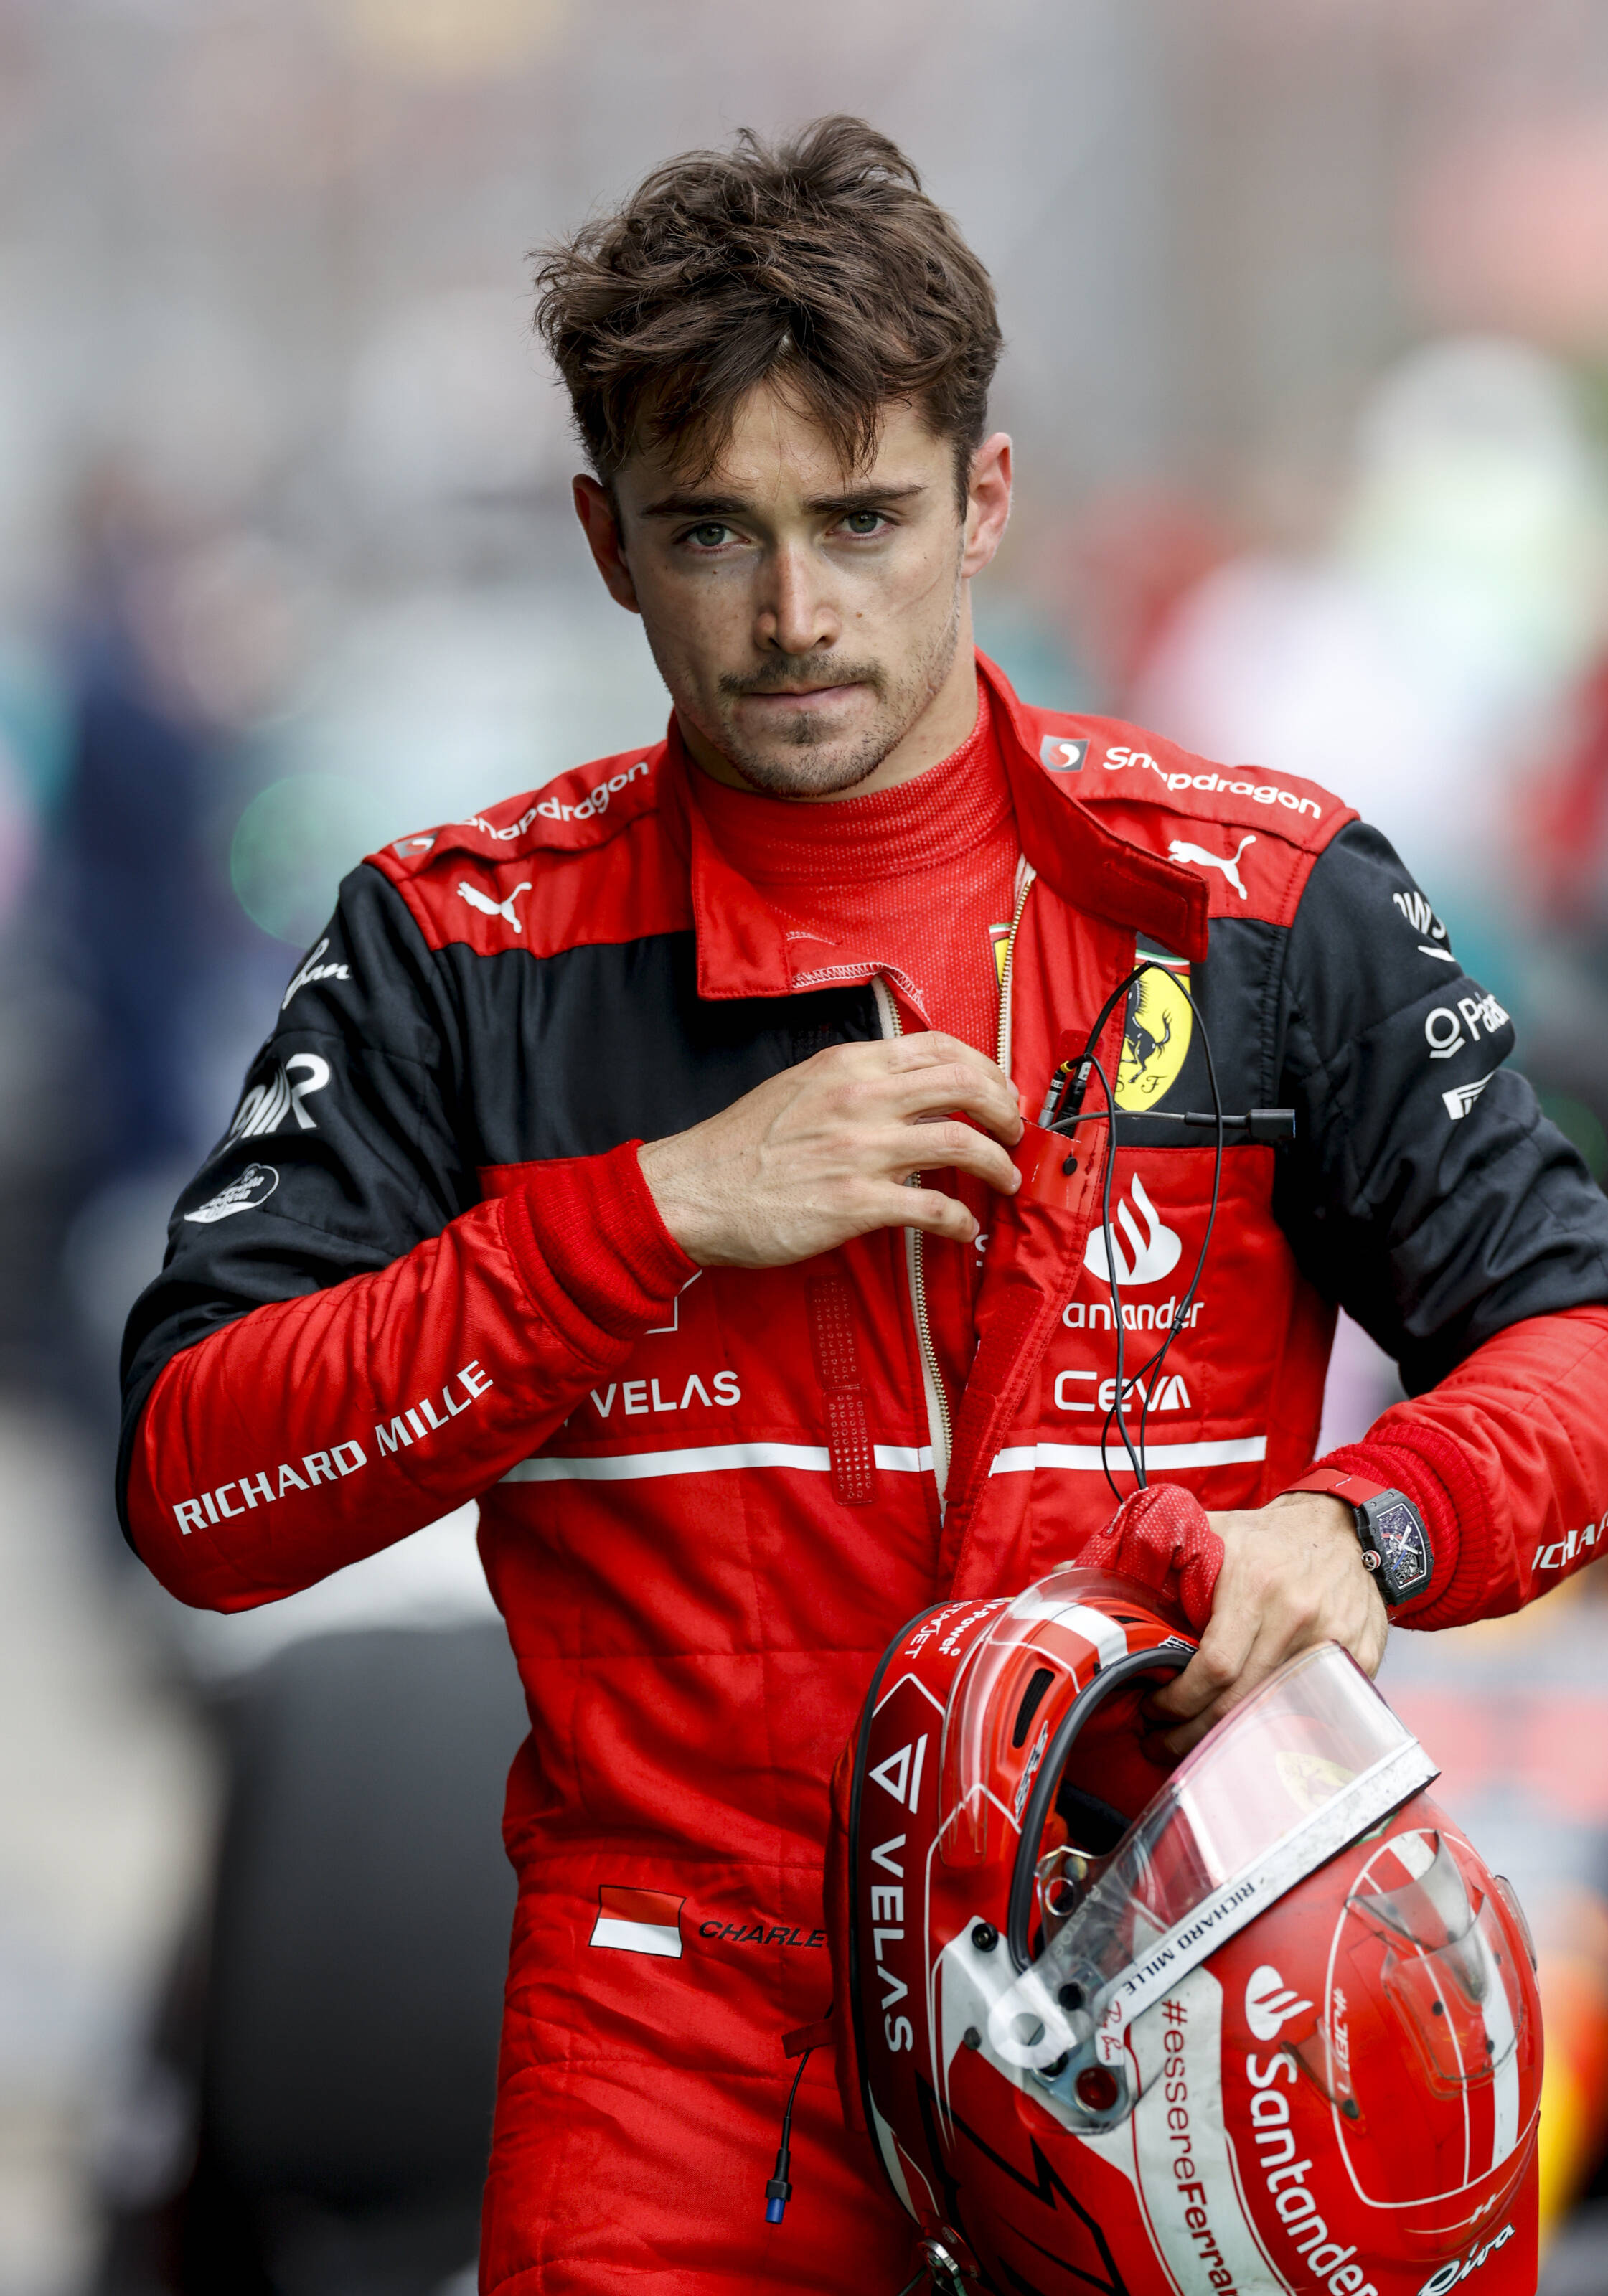 Ferrari driver Charles Leclerc promises to learn from mistakes at Imola